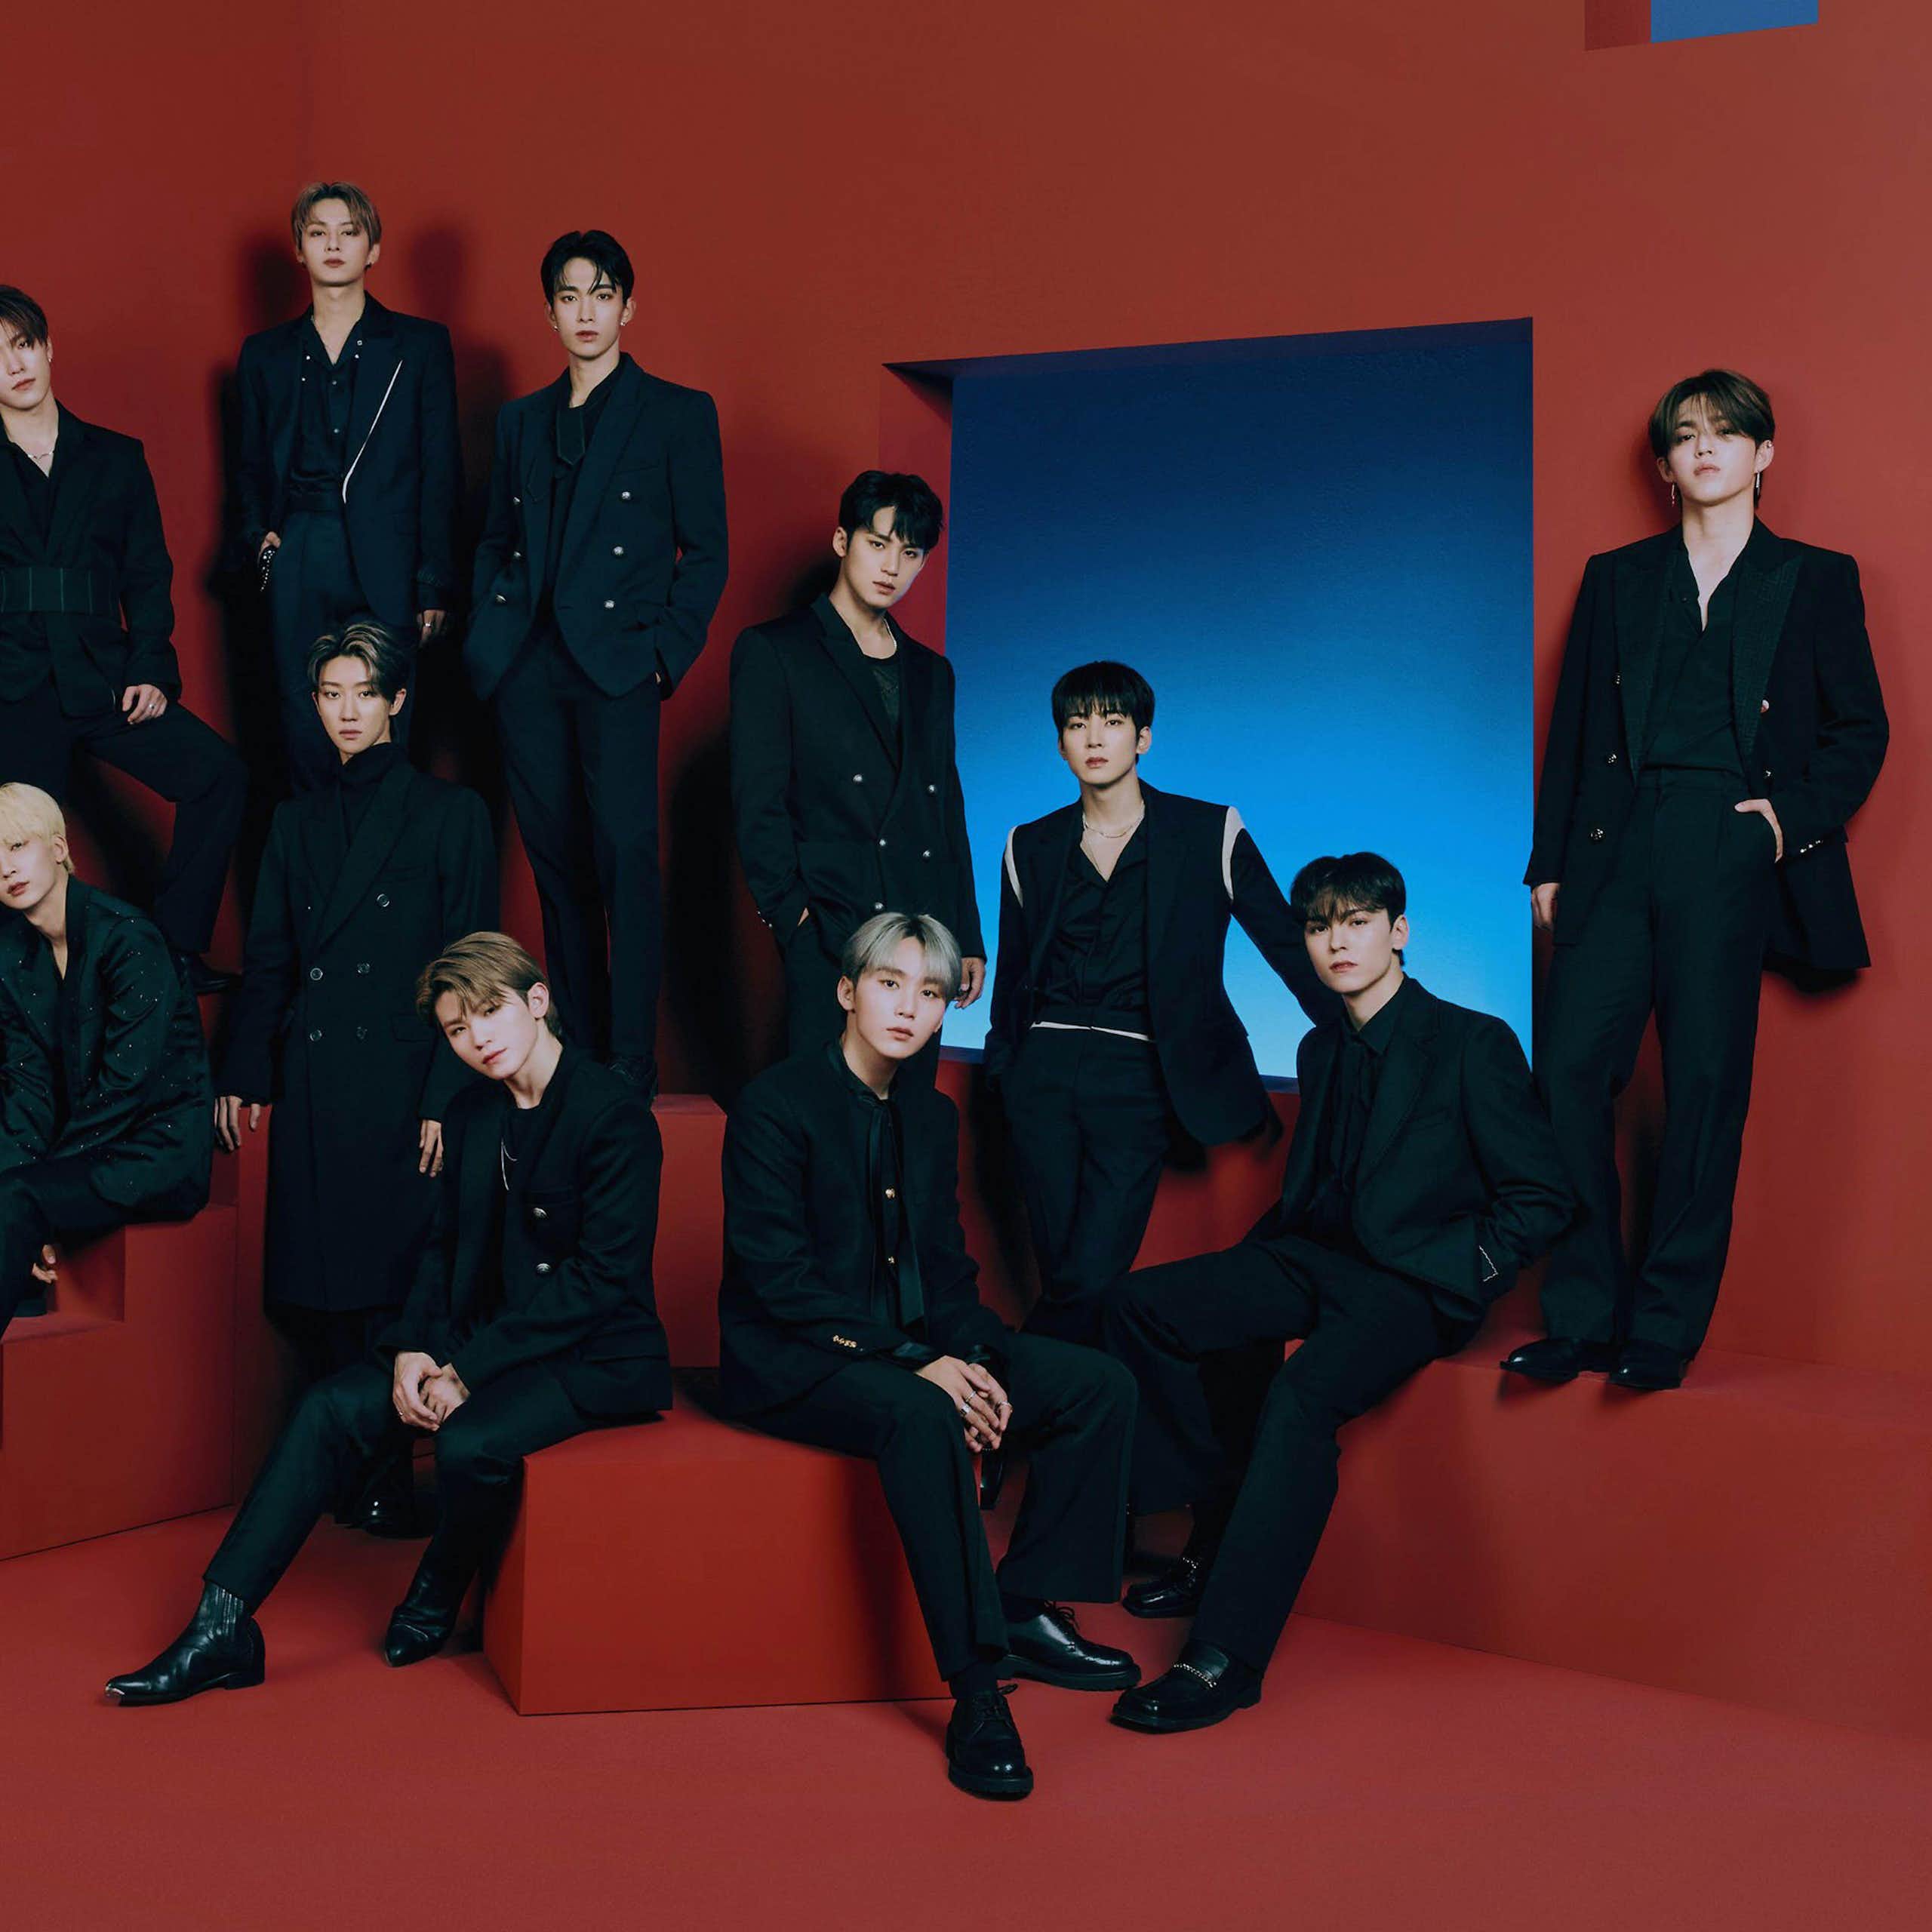 The 17 members of the K-pop band SEVENTEEN.